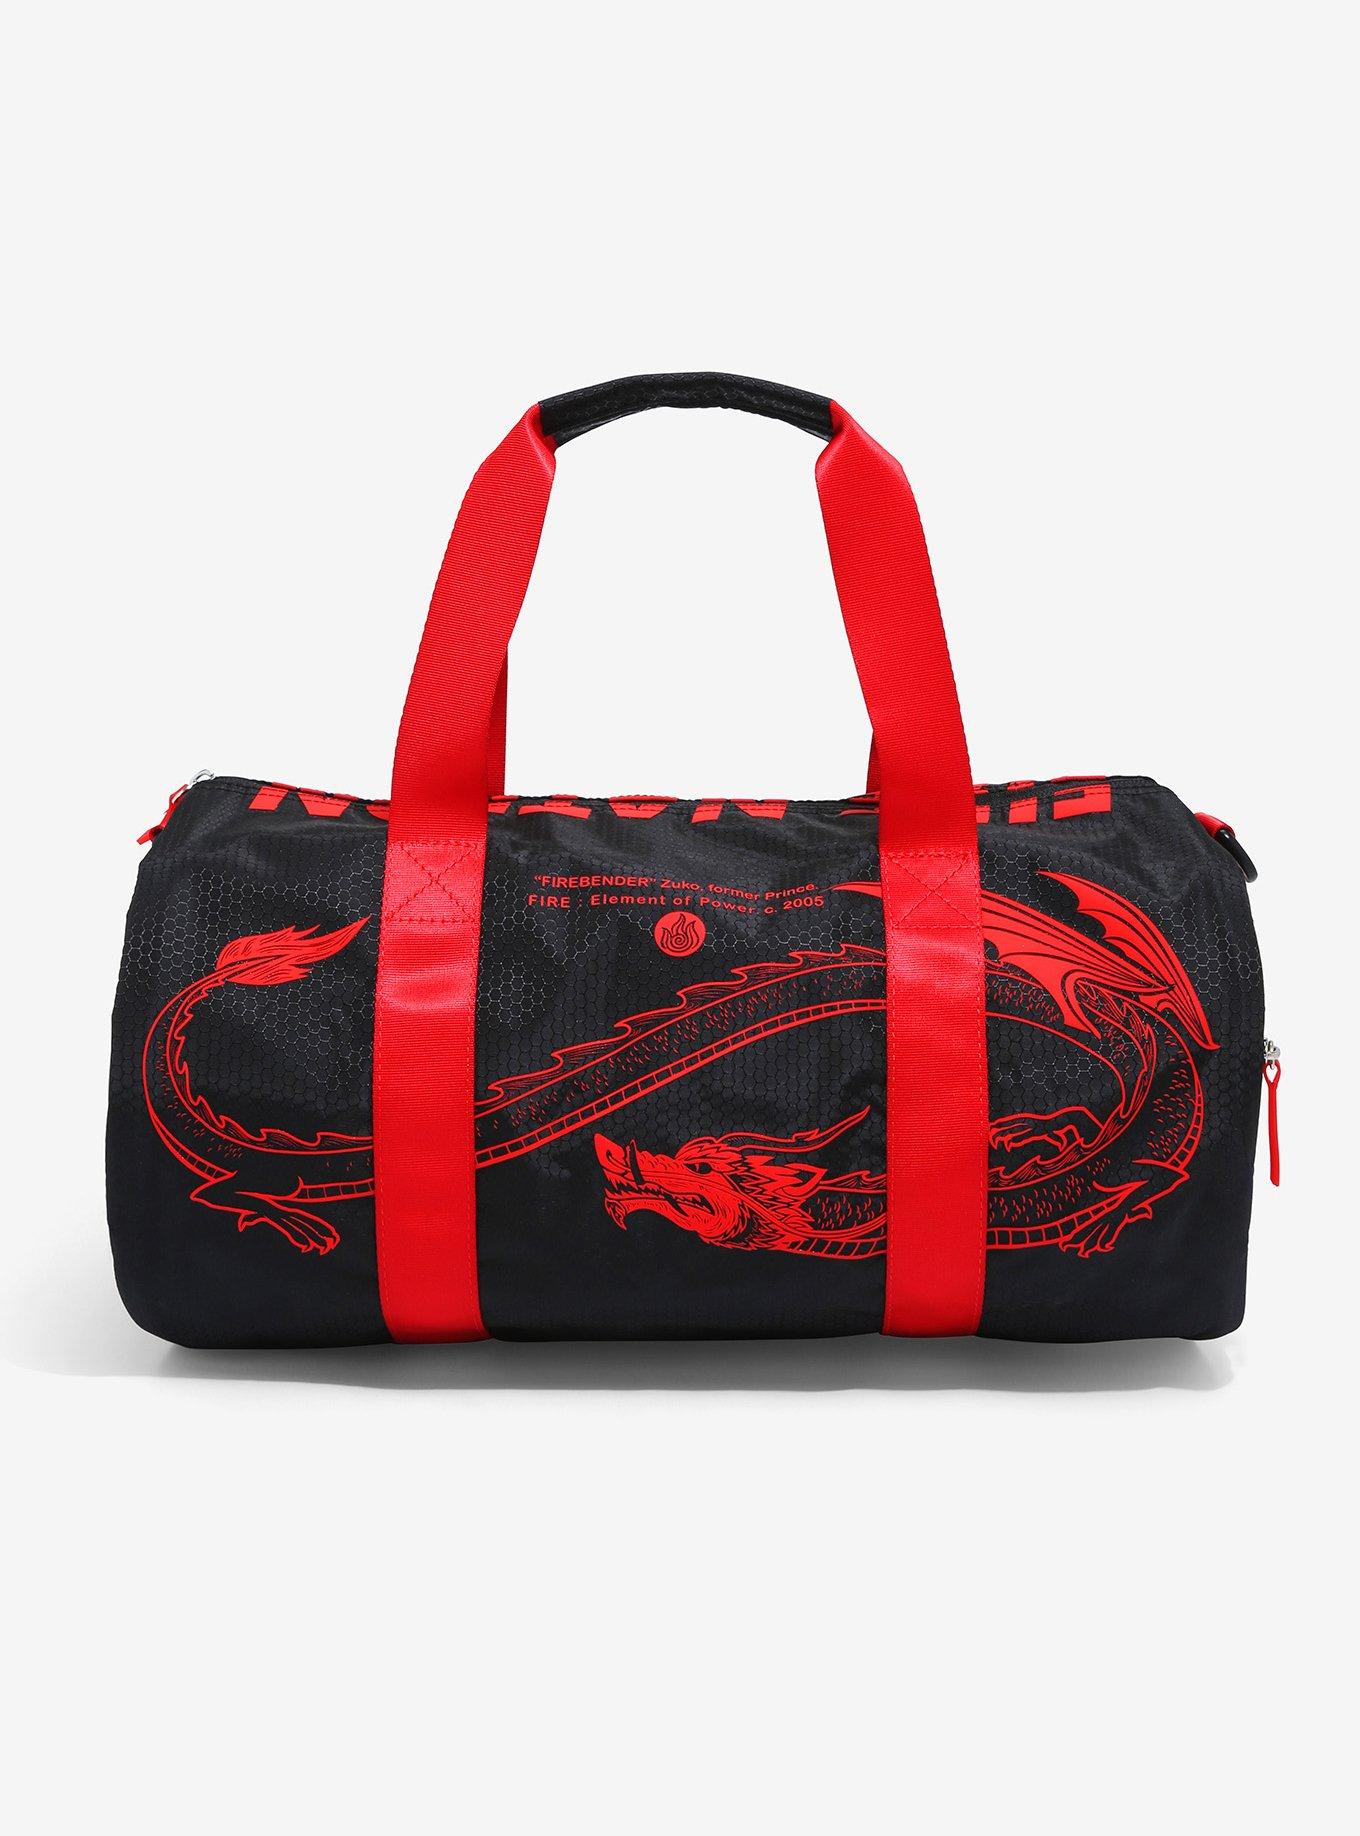 Avatar: The Last Airbender Firebender Duffel Bag - BoxLunch Exclusive